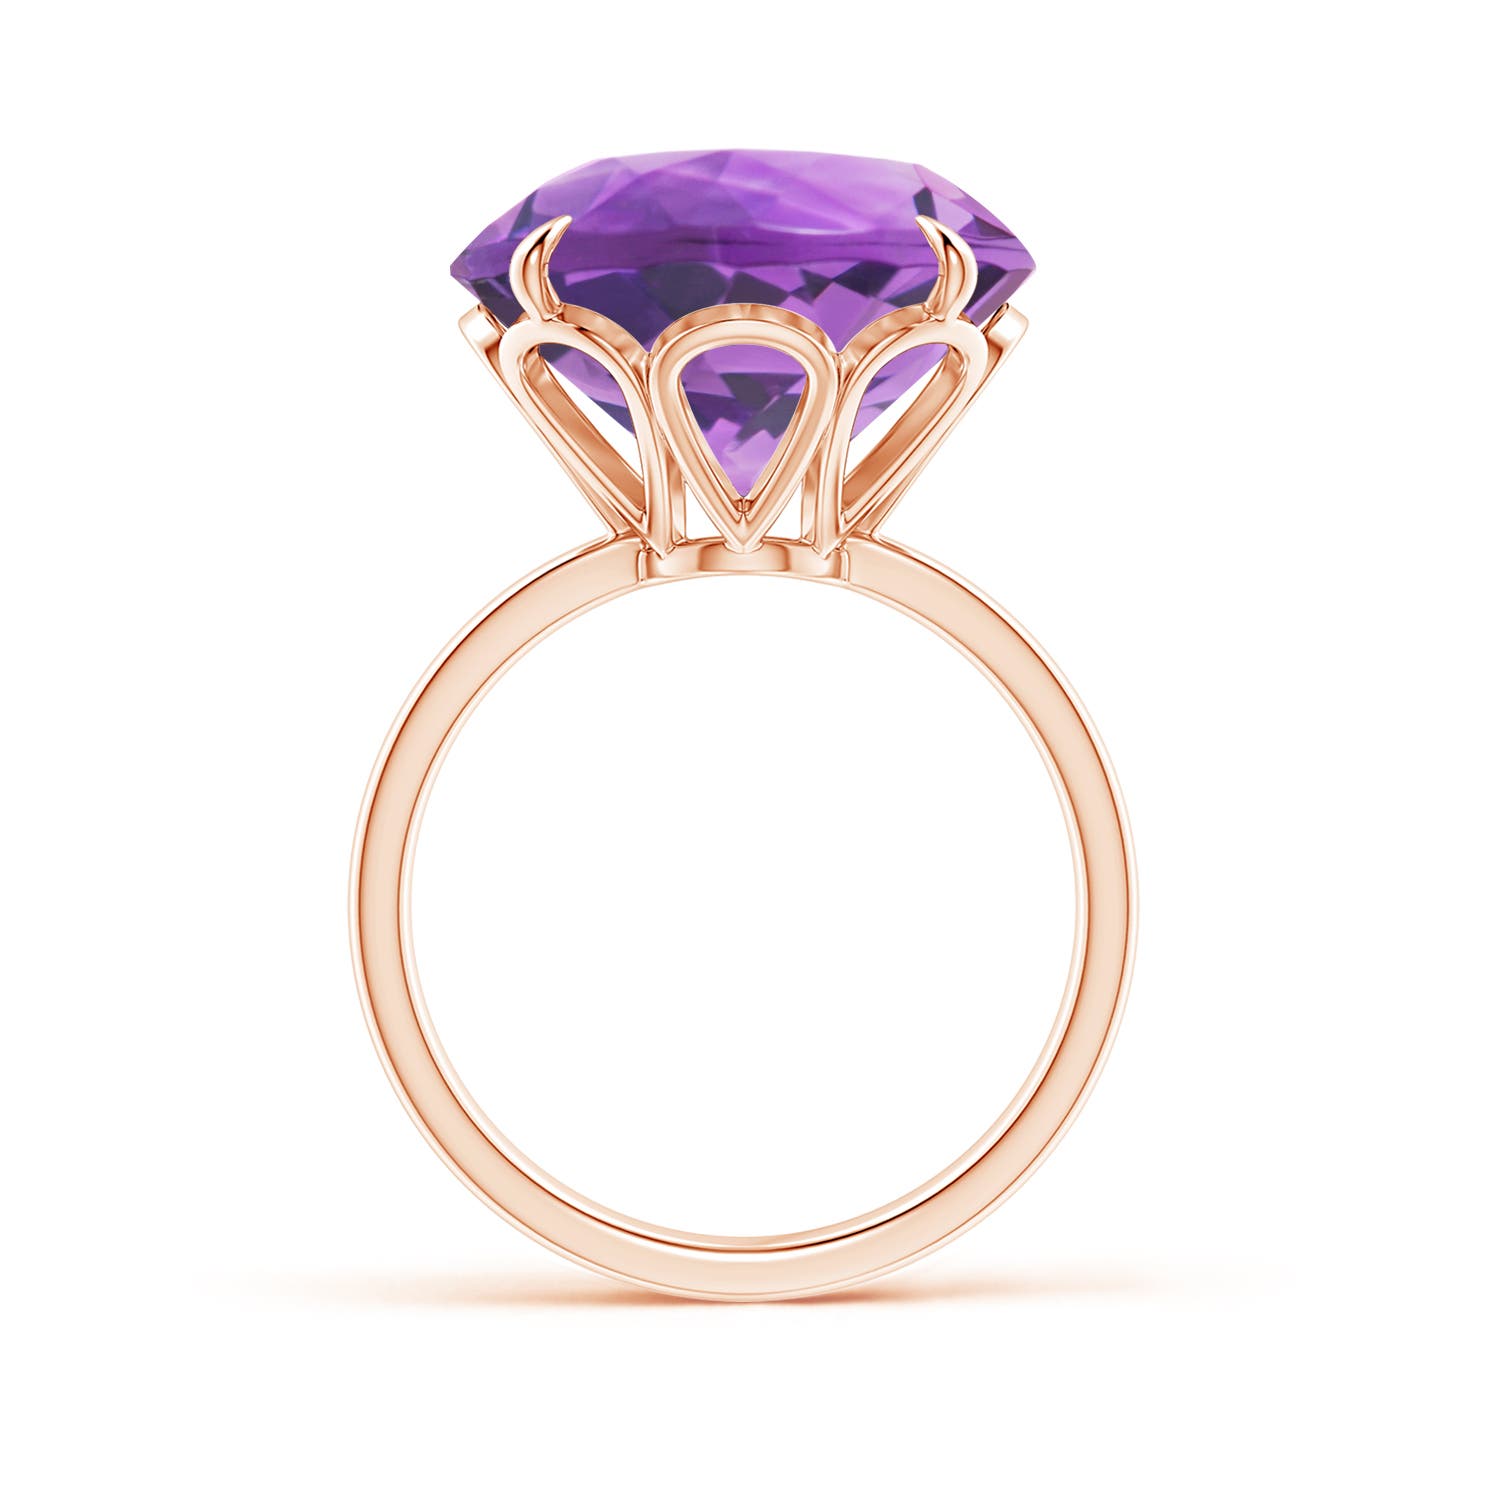 AA - Amethyst / 11 CT / 14 KT Rose Gold